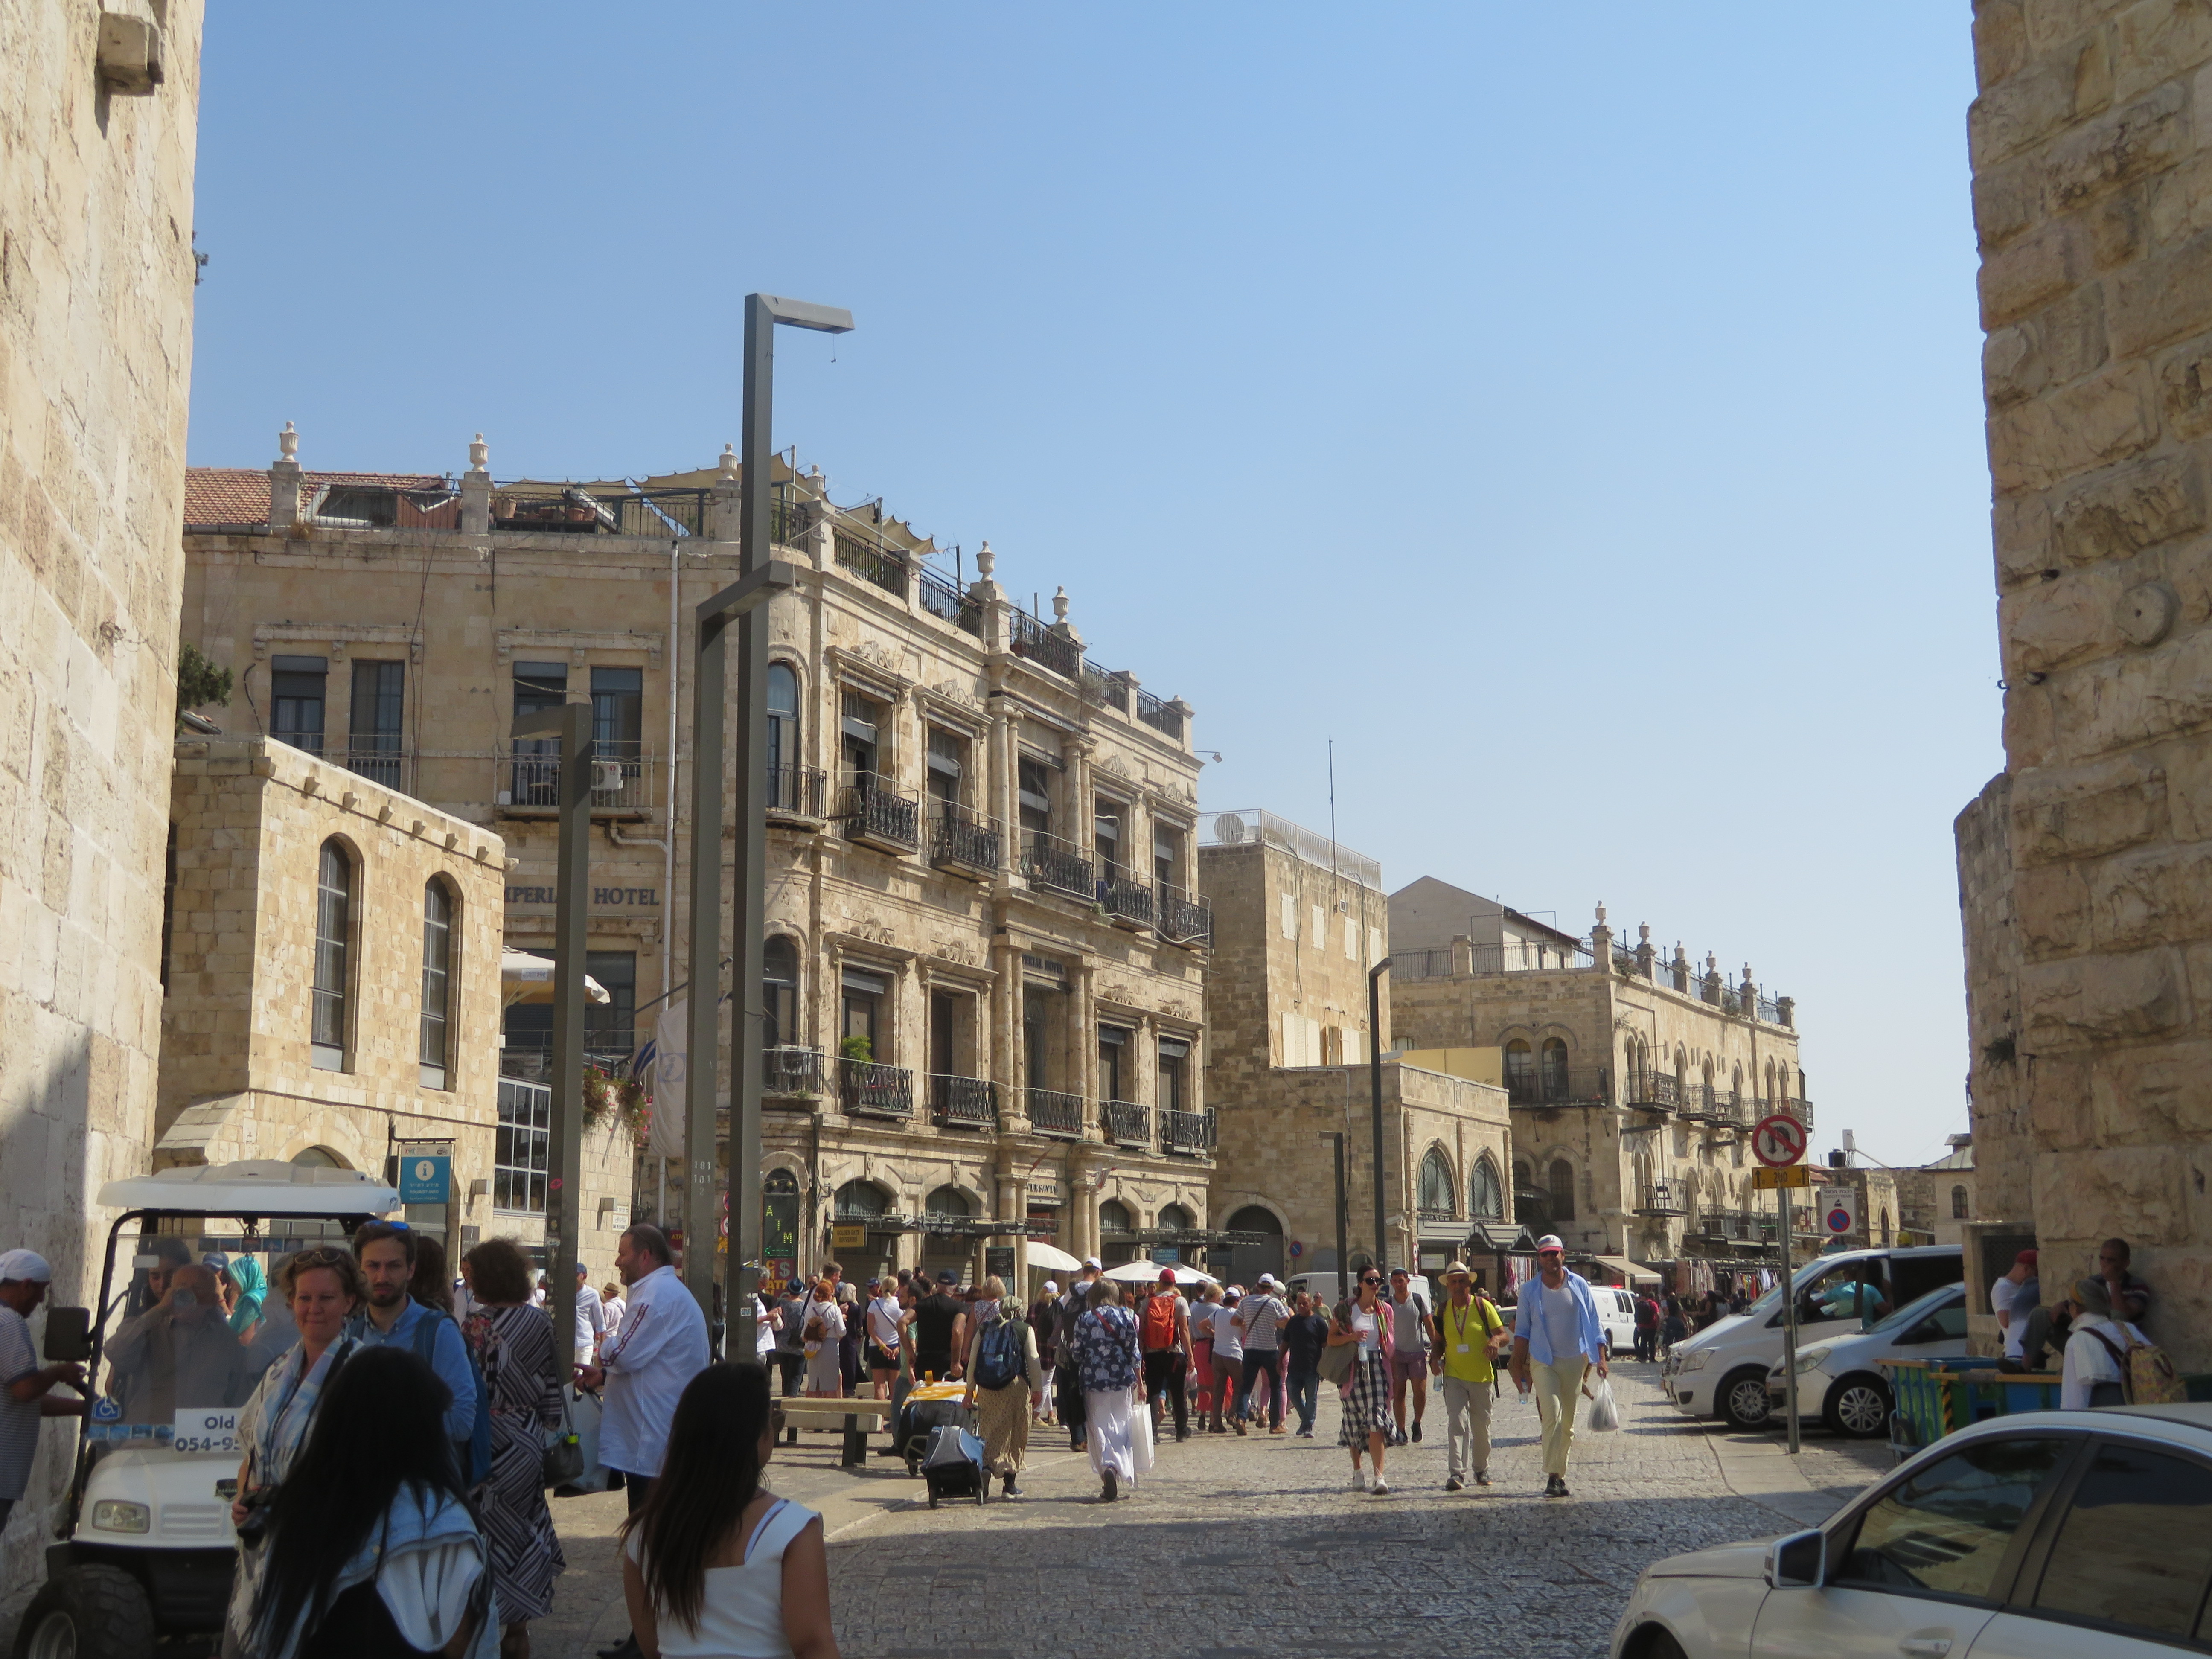 The Jaffa Gate Properties, including the Imperial Palace Hotel and the Petra Hostel.